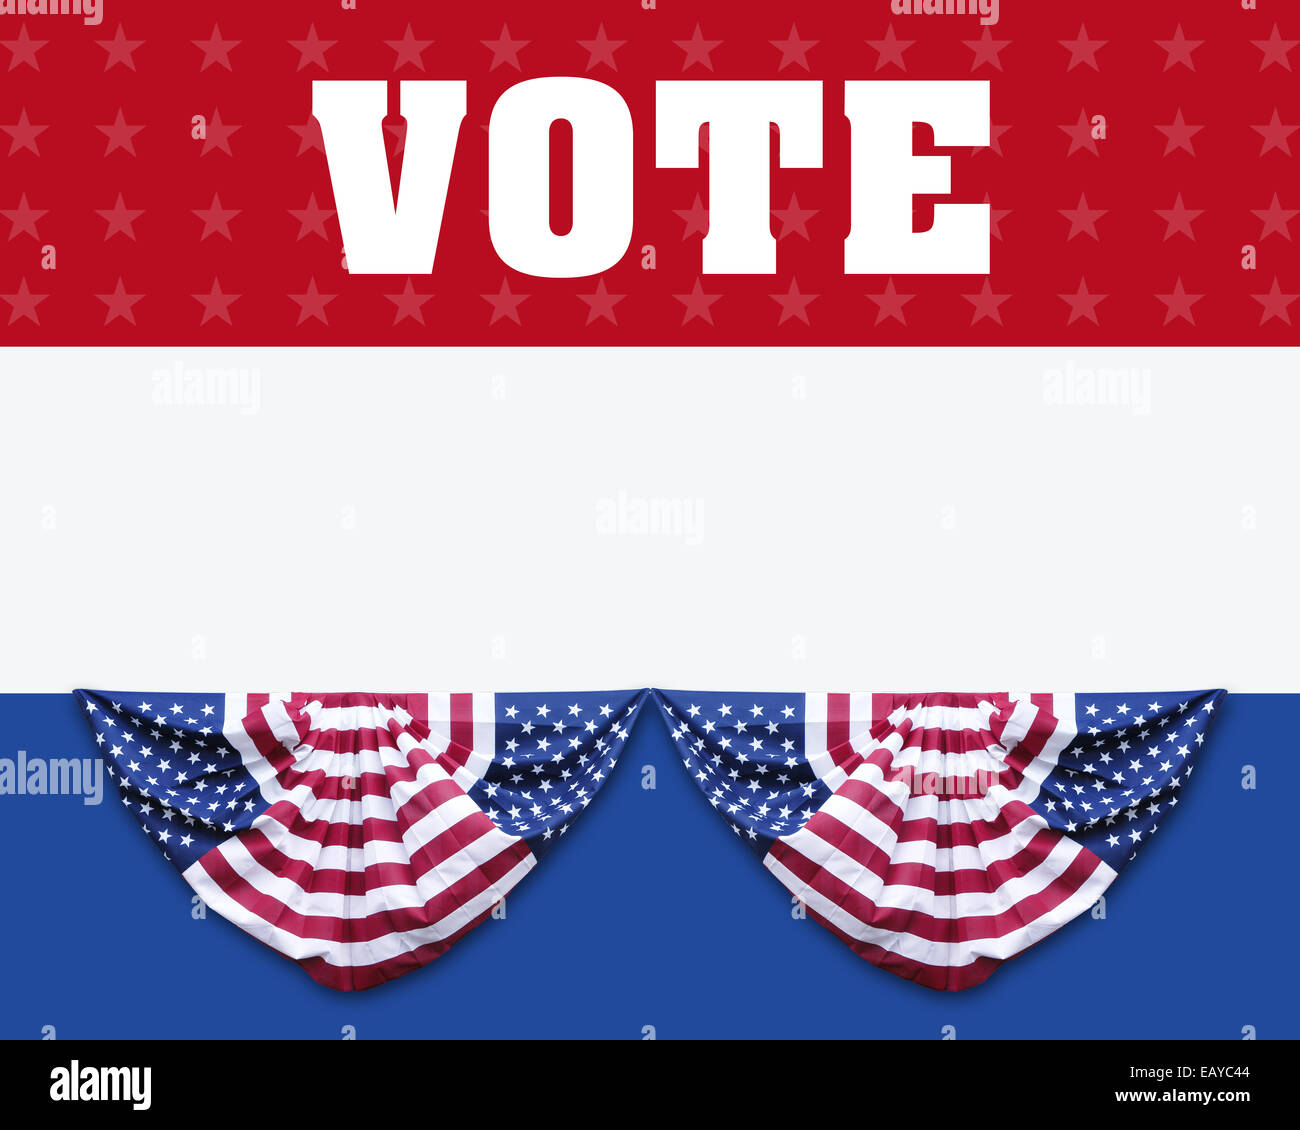 Election Poster Background: Red, white and blue election/campaign poster or  background with patriotic bunting decorations Stock Photo - Alamy